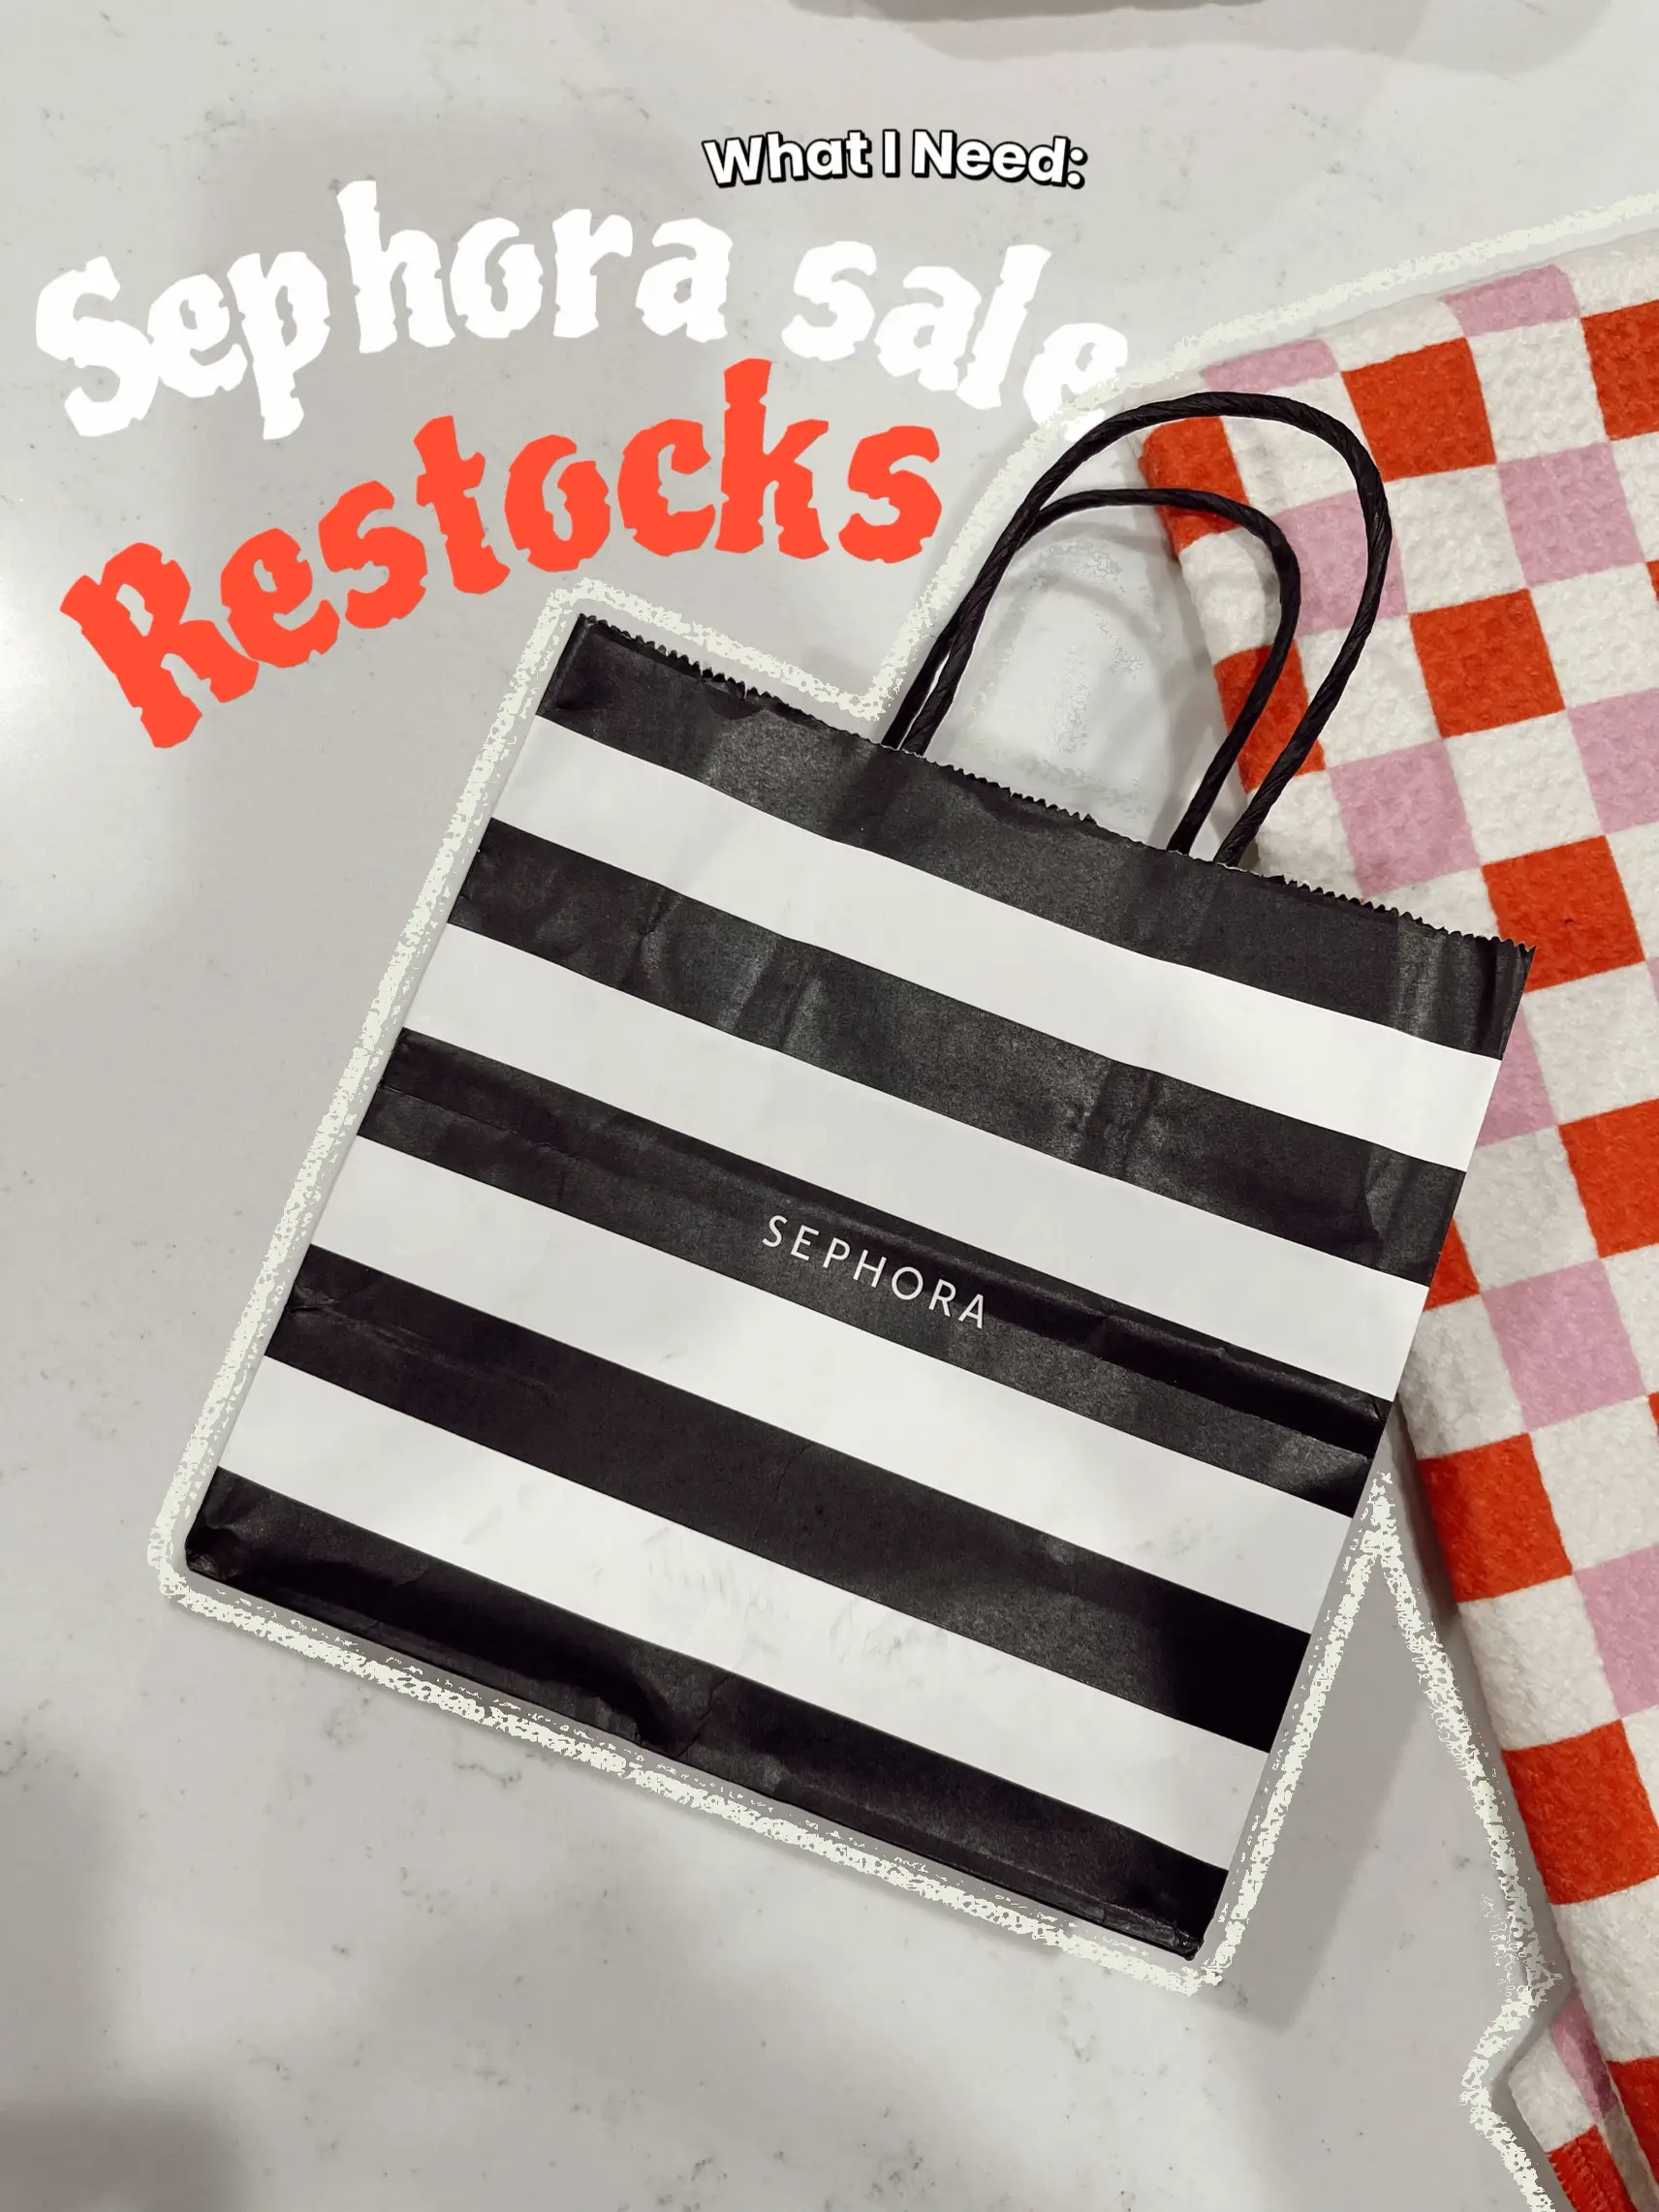  A black and white bag with a striped pattern and the word "Sephora" on it.